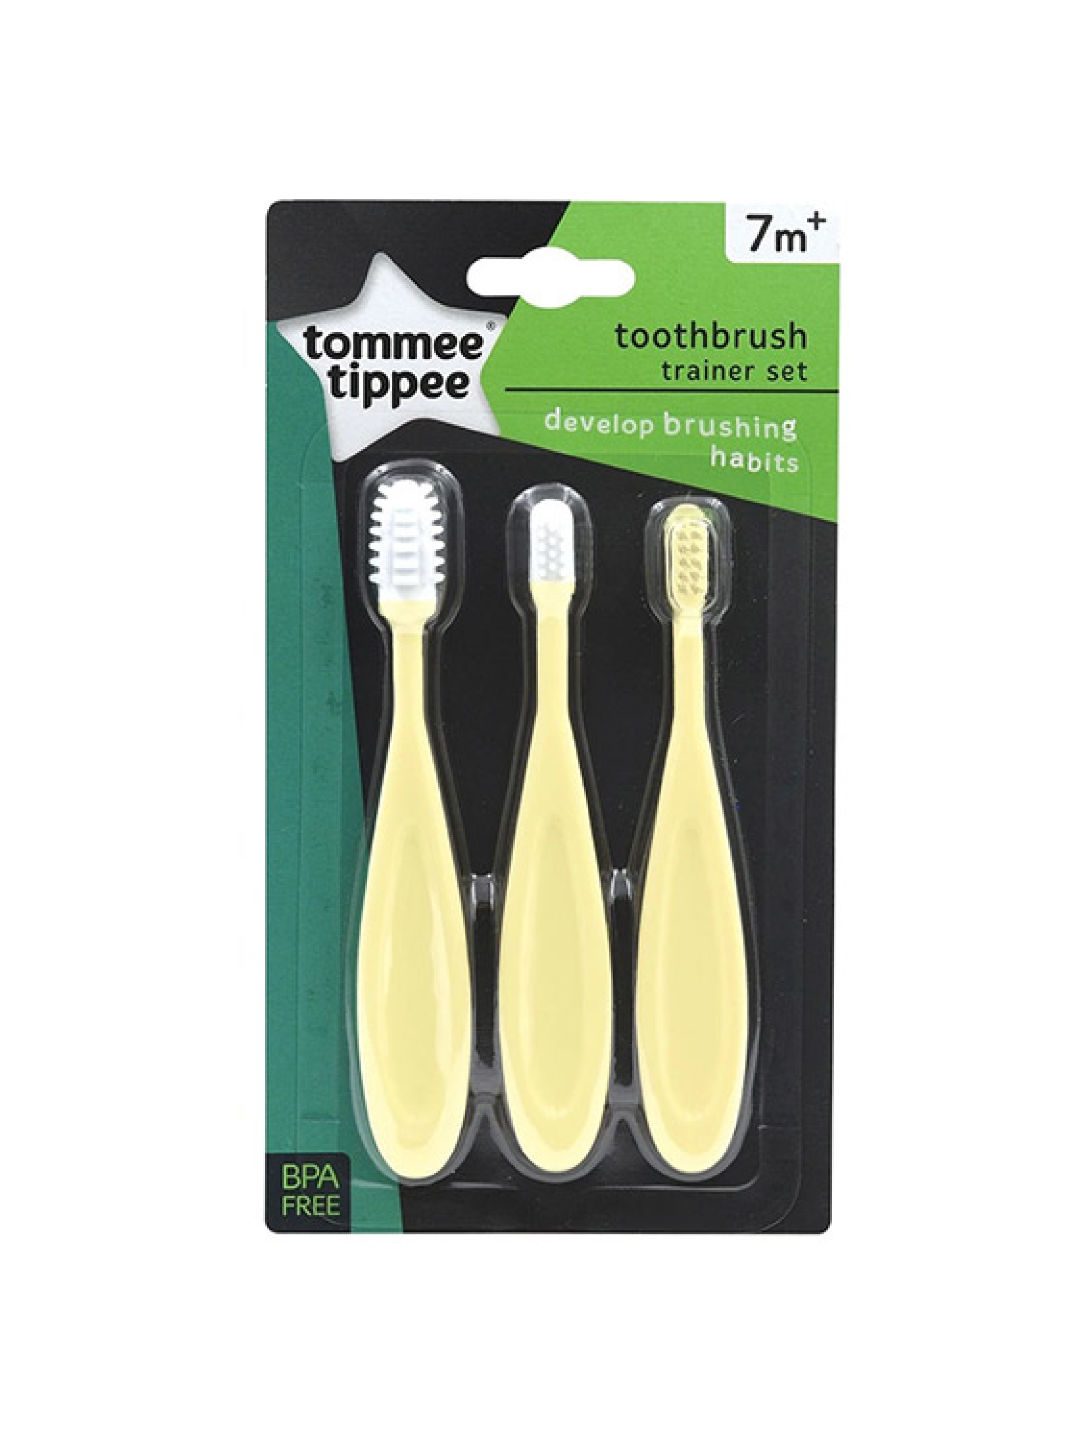 Tommee Tippee Toothbrush Trainer Set